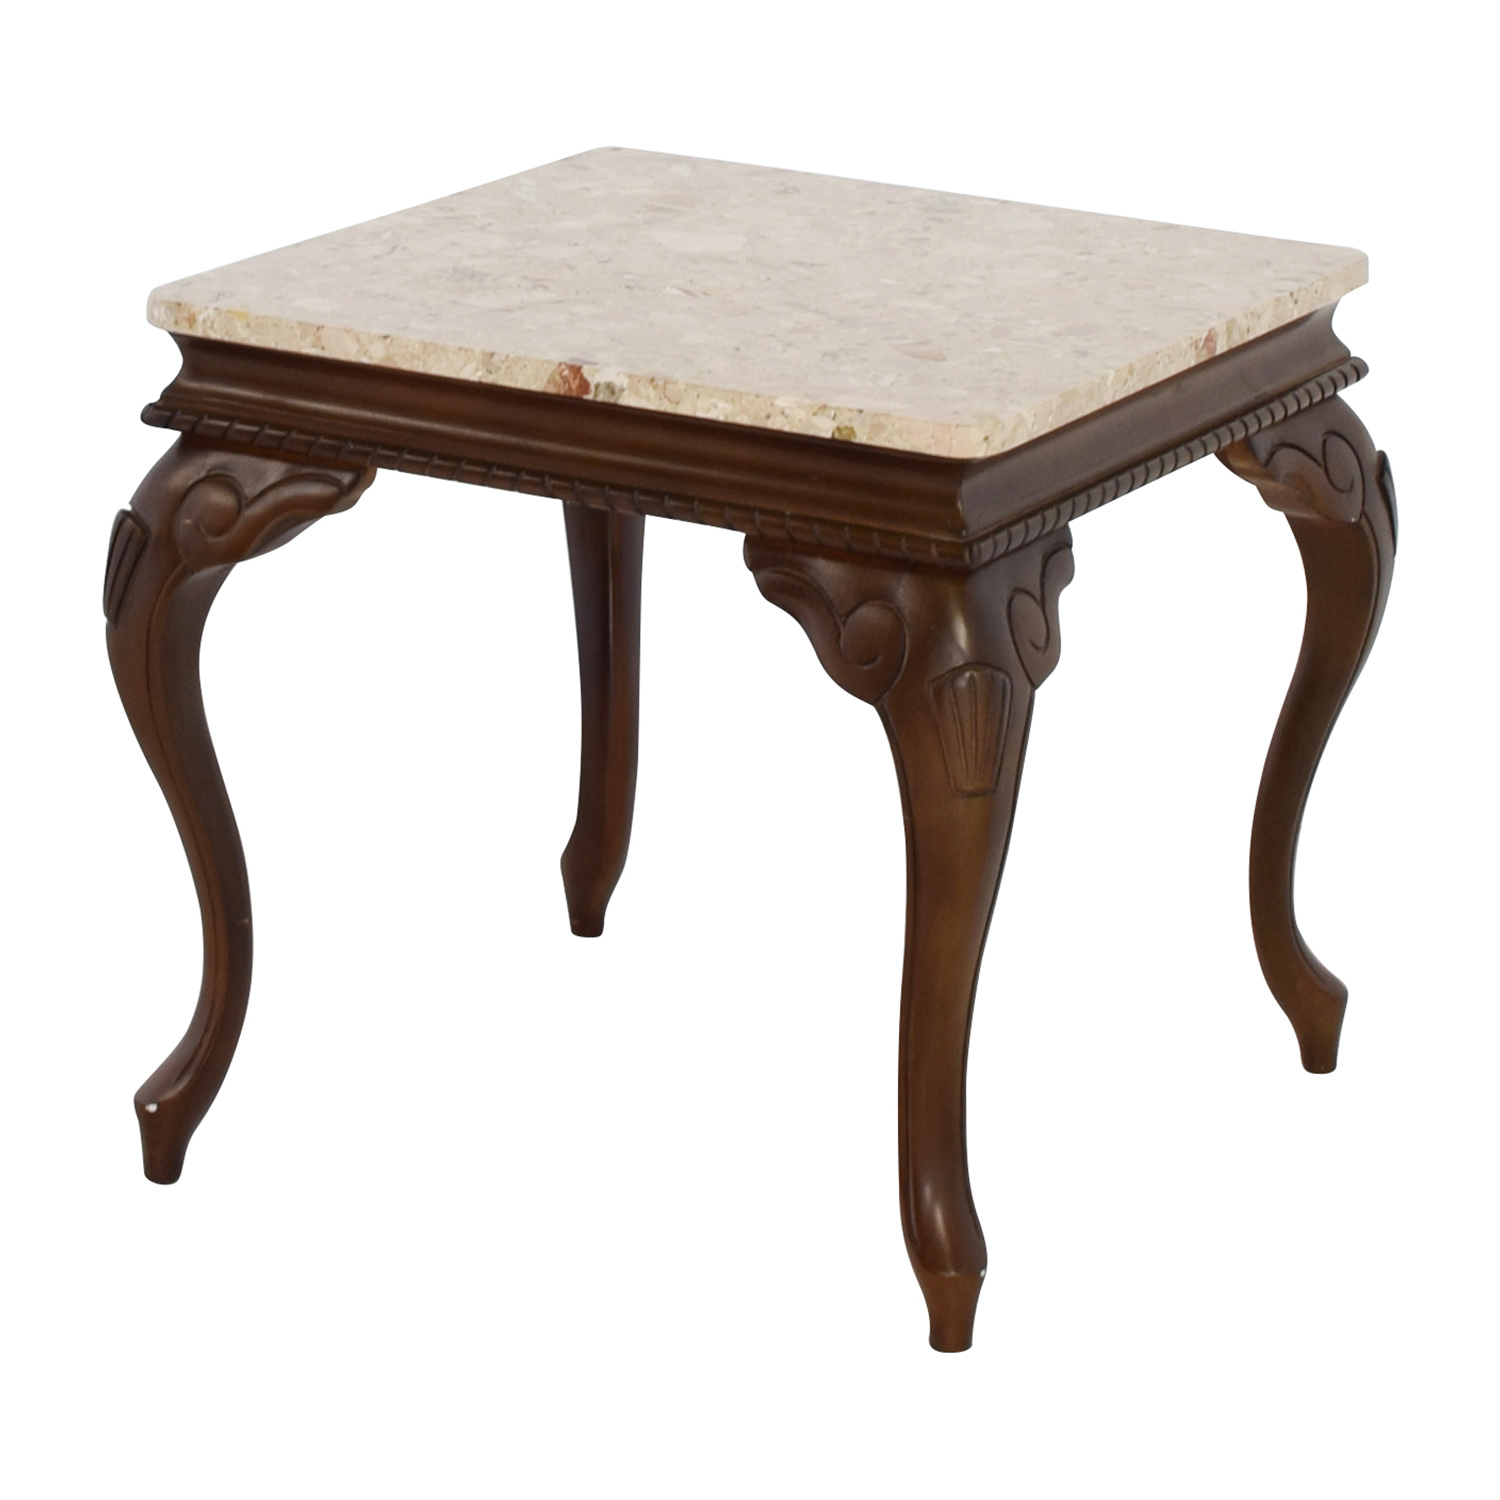 marble top end tables house design french accent table off nate berkus round gold with furniture black metal directoire wide threshold wood small dining leaf modern acrylic coffee